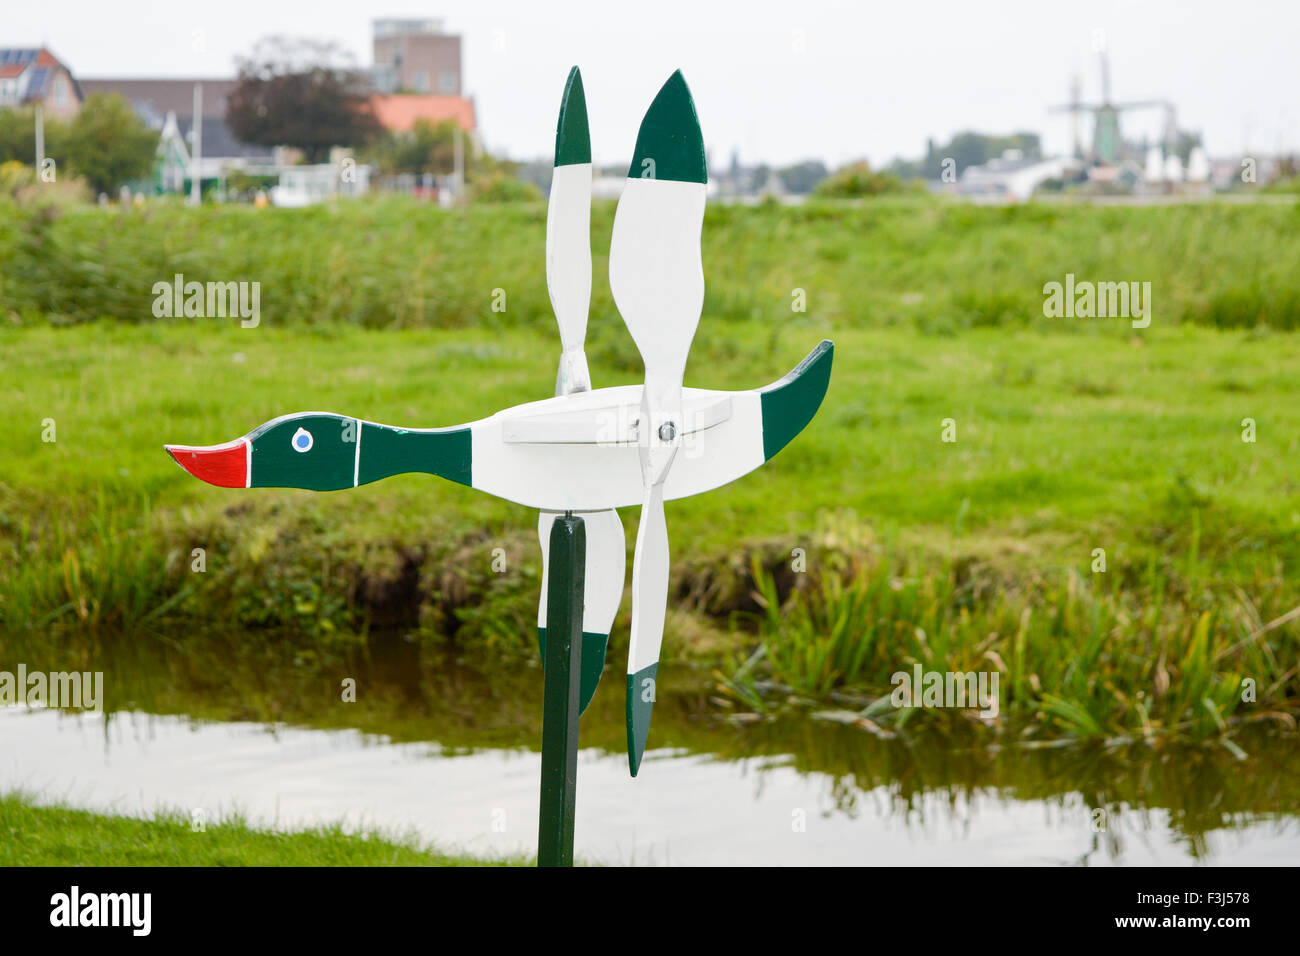 Crazy duck decoration with windmills in the background at Zaanse Schans, Netherlands Stock Photo